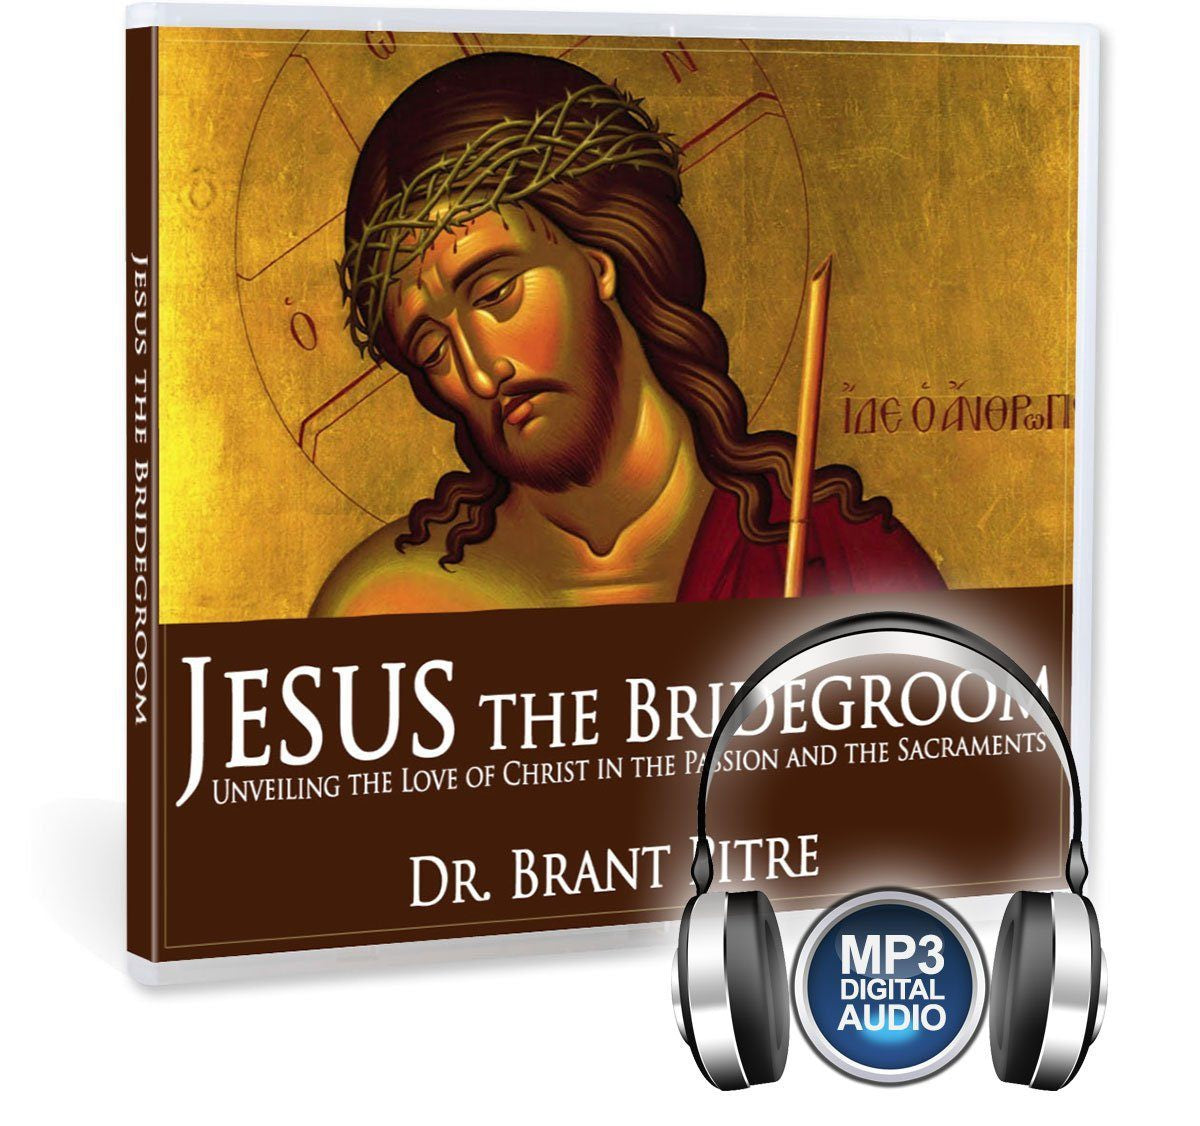 Dr. Brant Pitre discusses Jesus as the Bridegroom of the New Israel, the Church, in this Bible study on CD.